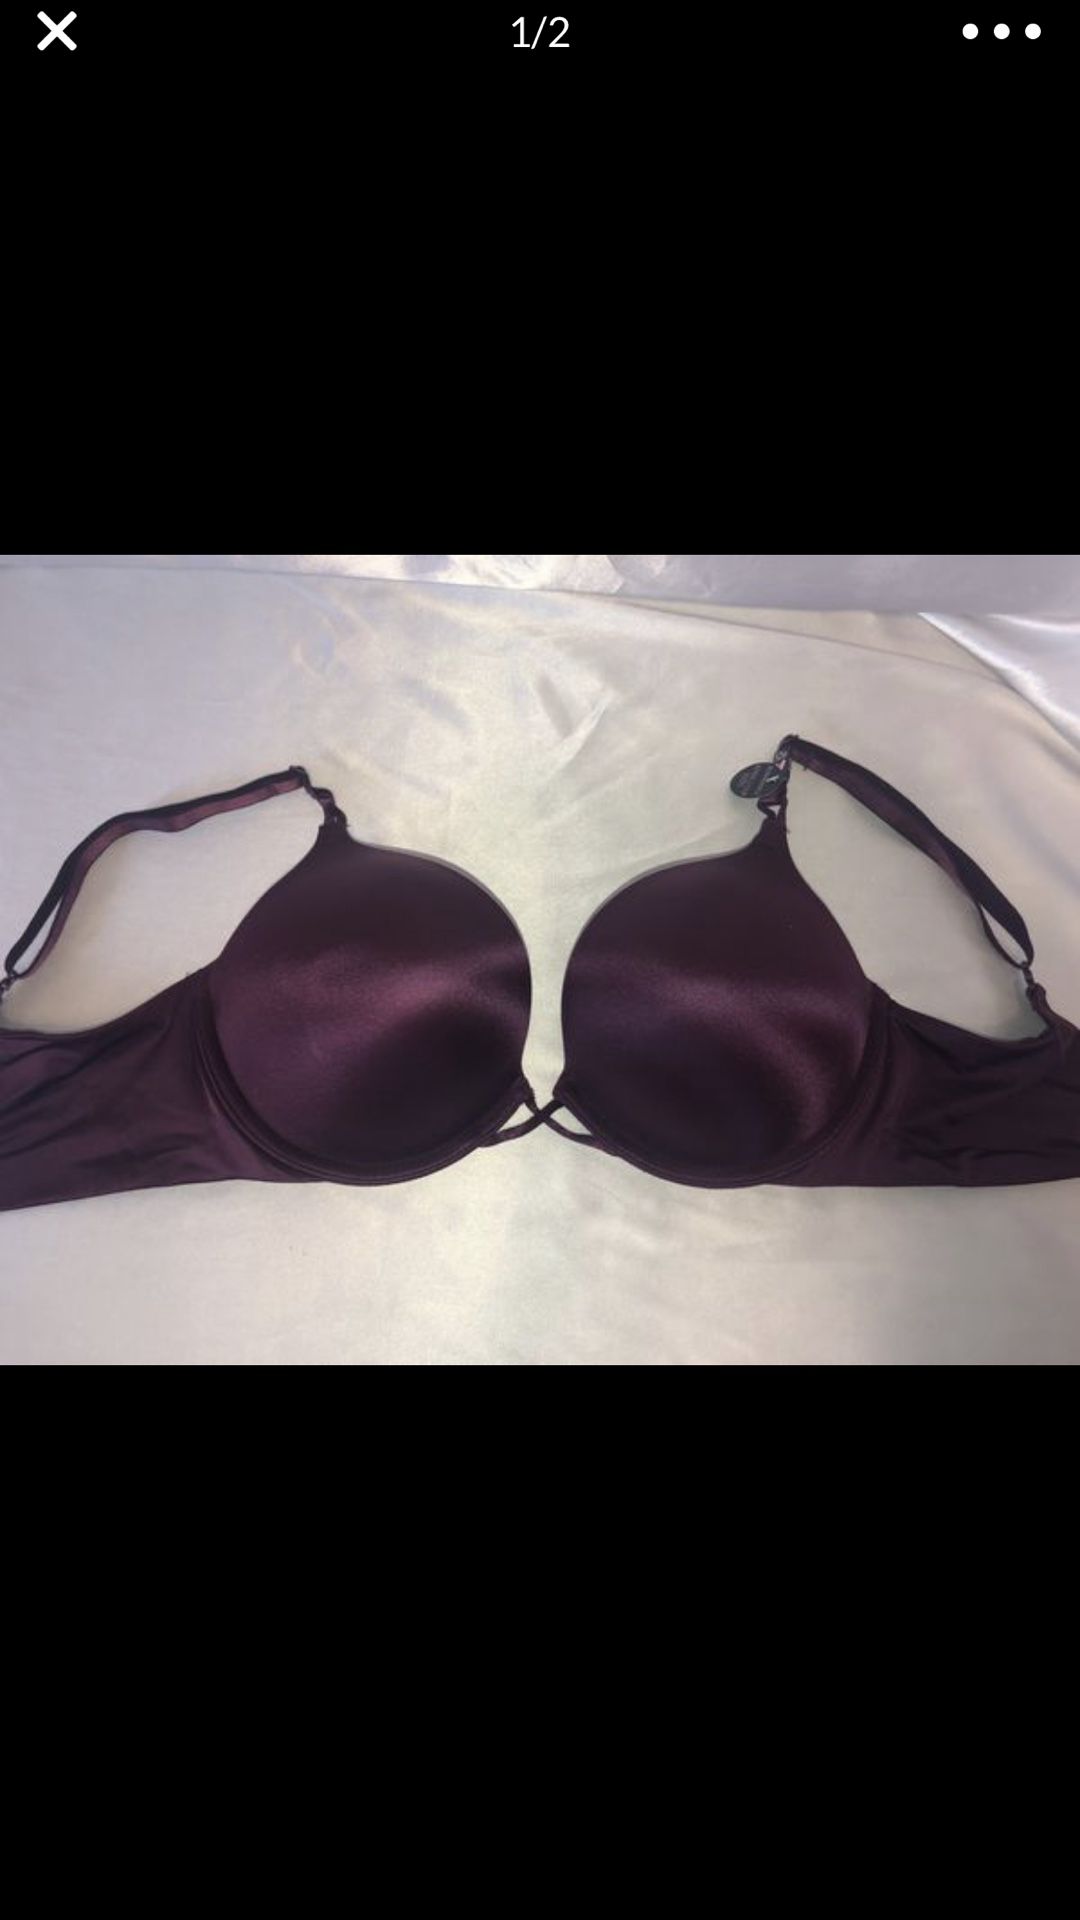 Victoria Secret Bombshell Bra add 2 cup sizes 38D for Sale in Nanuet, NY -  OfferUp